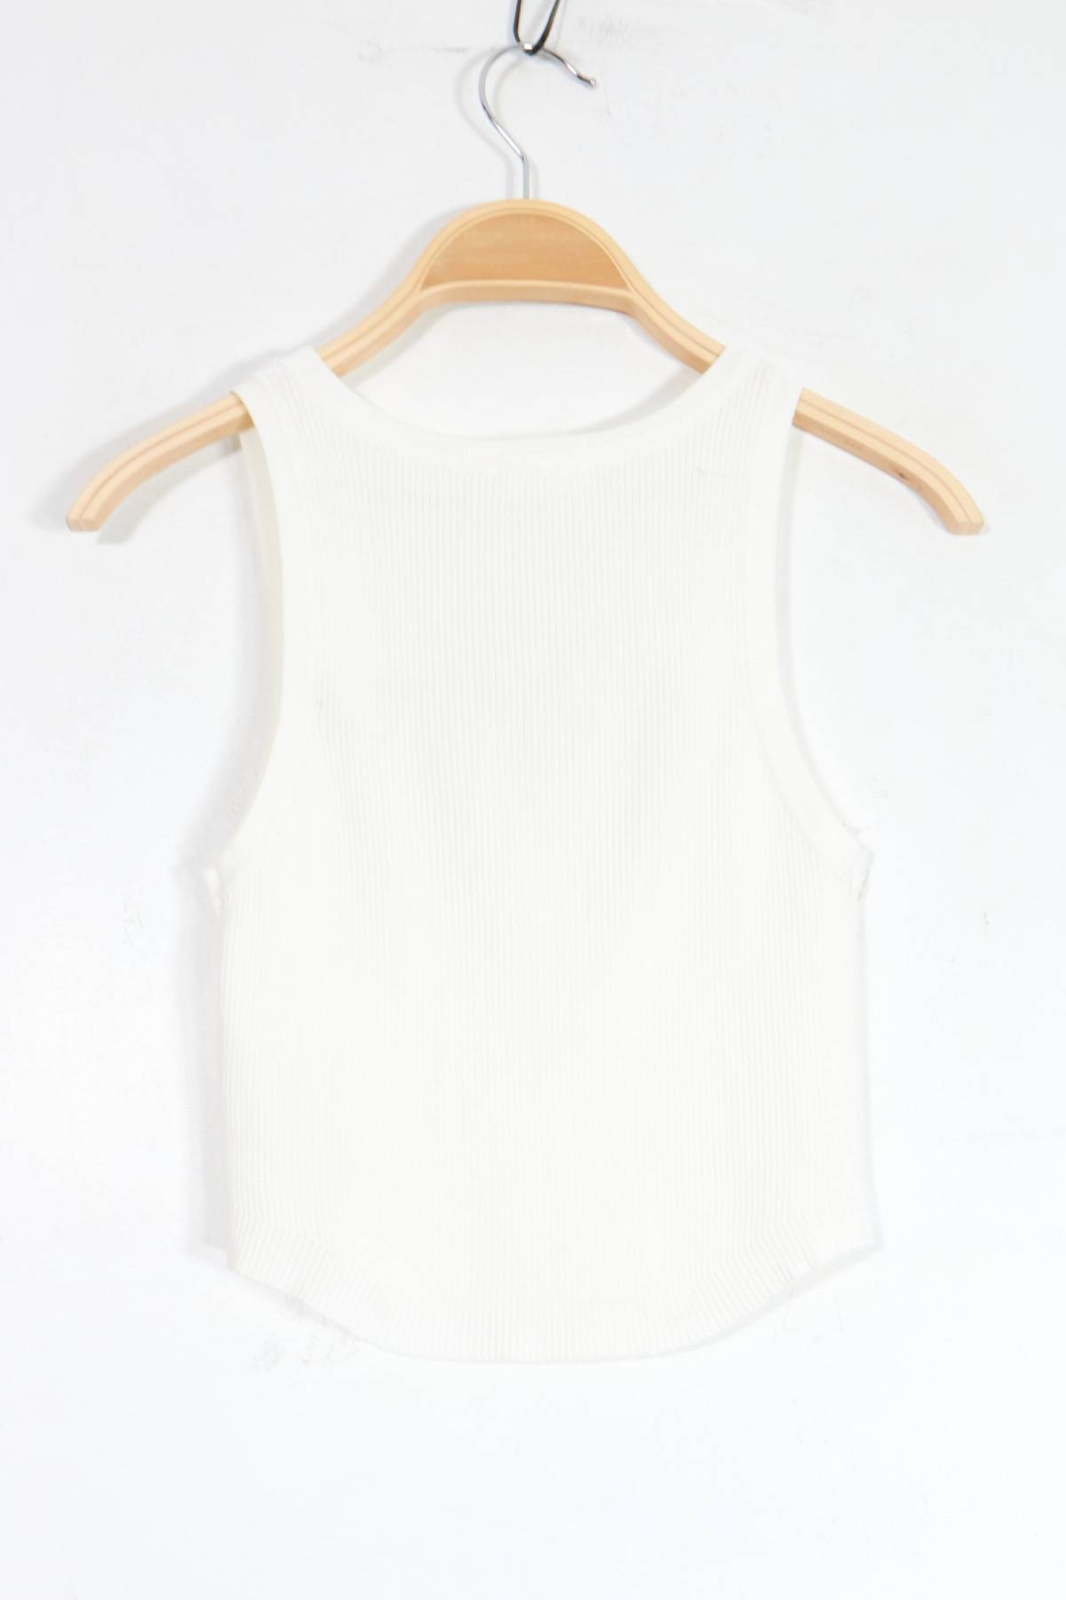 Ribbed Crop Top - White